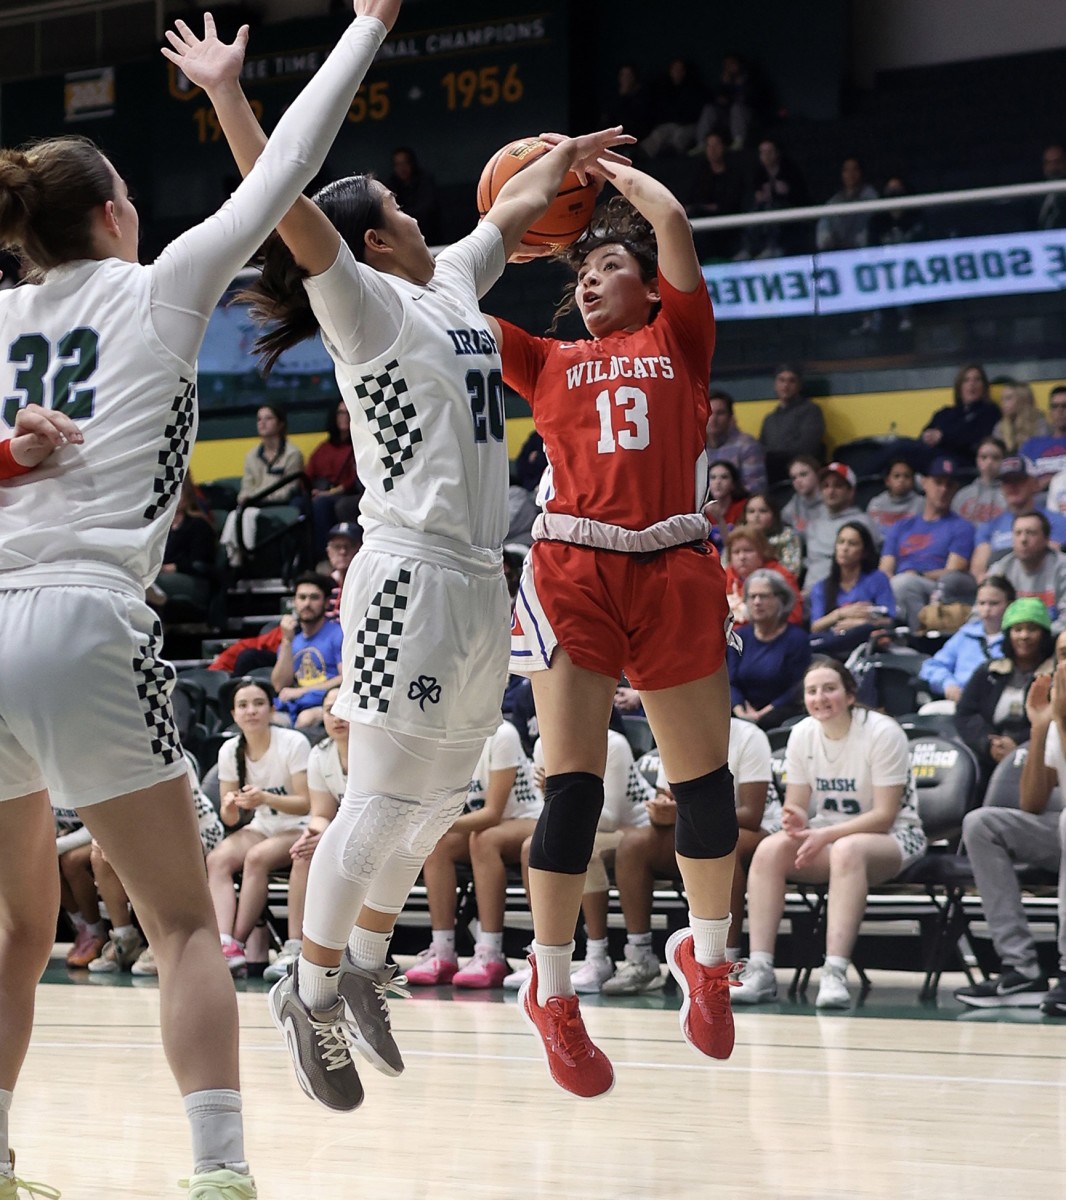 Sophia Sanchez with a jumper against great defense from SHC's Reza Po at USF earlier this season. 